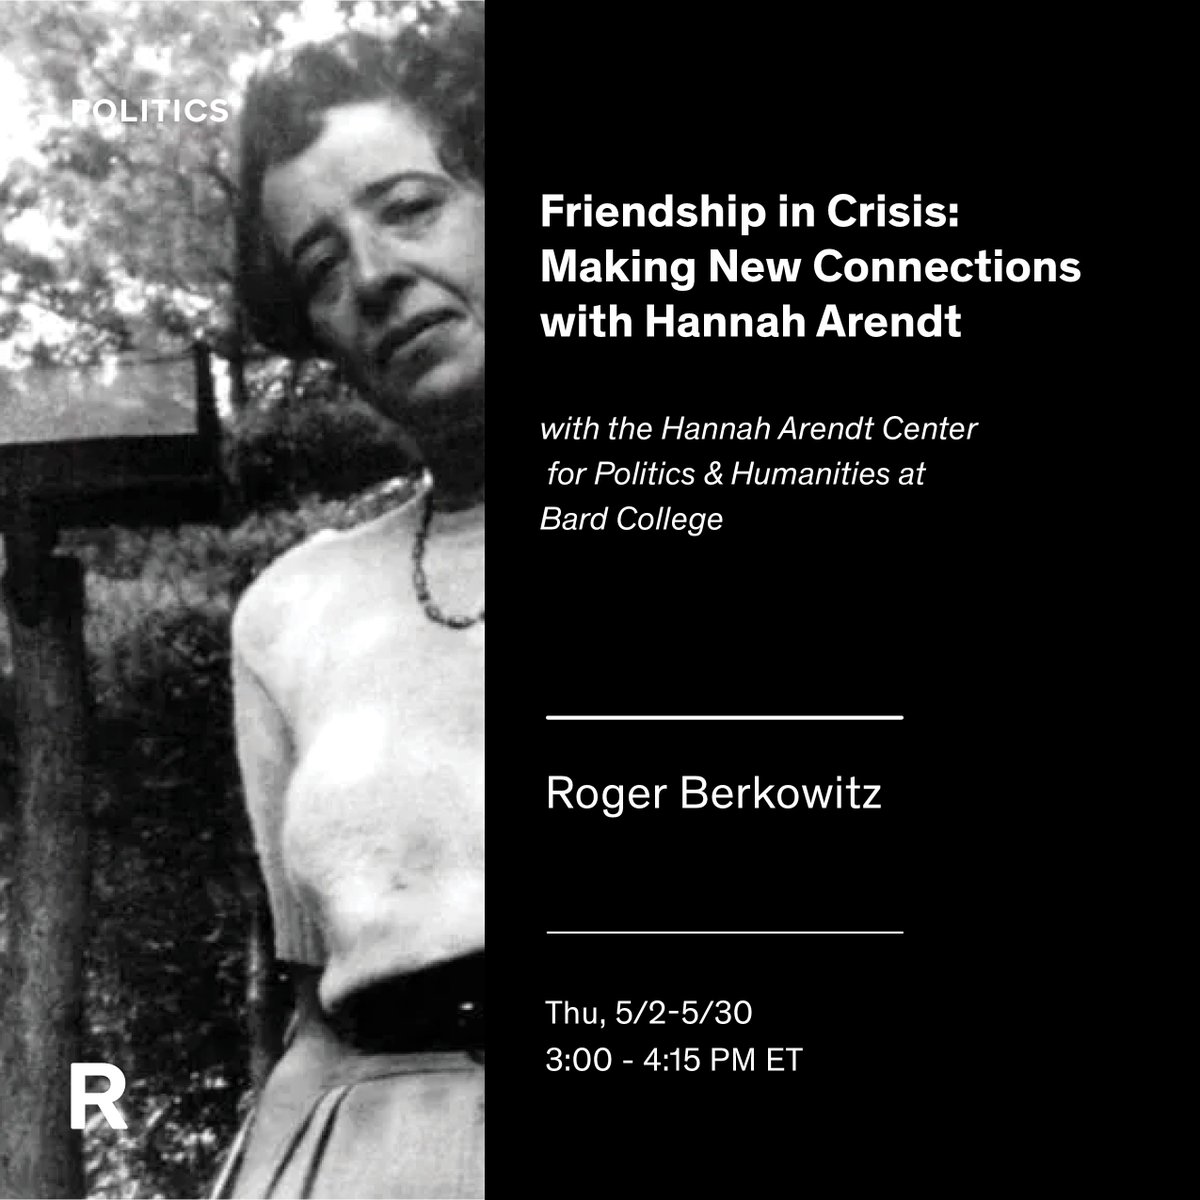 Discover Hannah Arendt's focus on friendship in this 5-part course with @Arendt_Center's founder, Roger Berkowitz, as we delve into Arendt's 'genius for friendship'. #hannaharendt @ArendtNetwork Enroll: bit.ly/3Q3rXH5